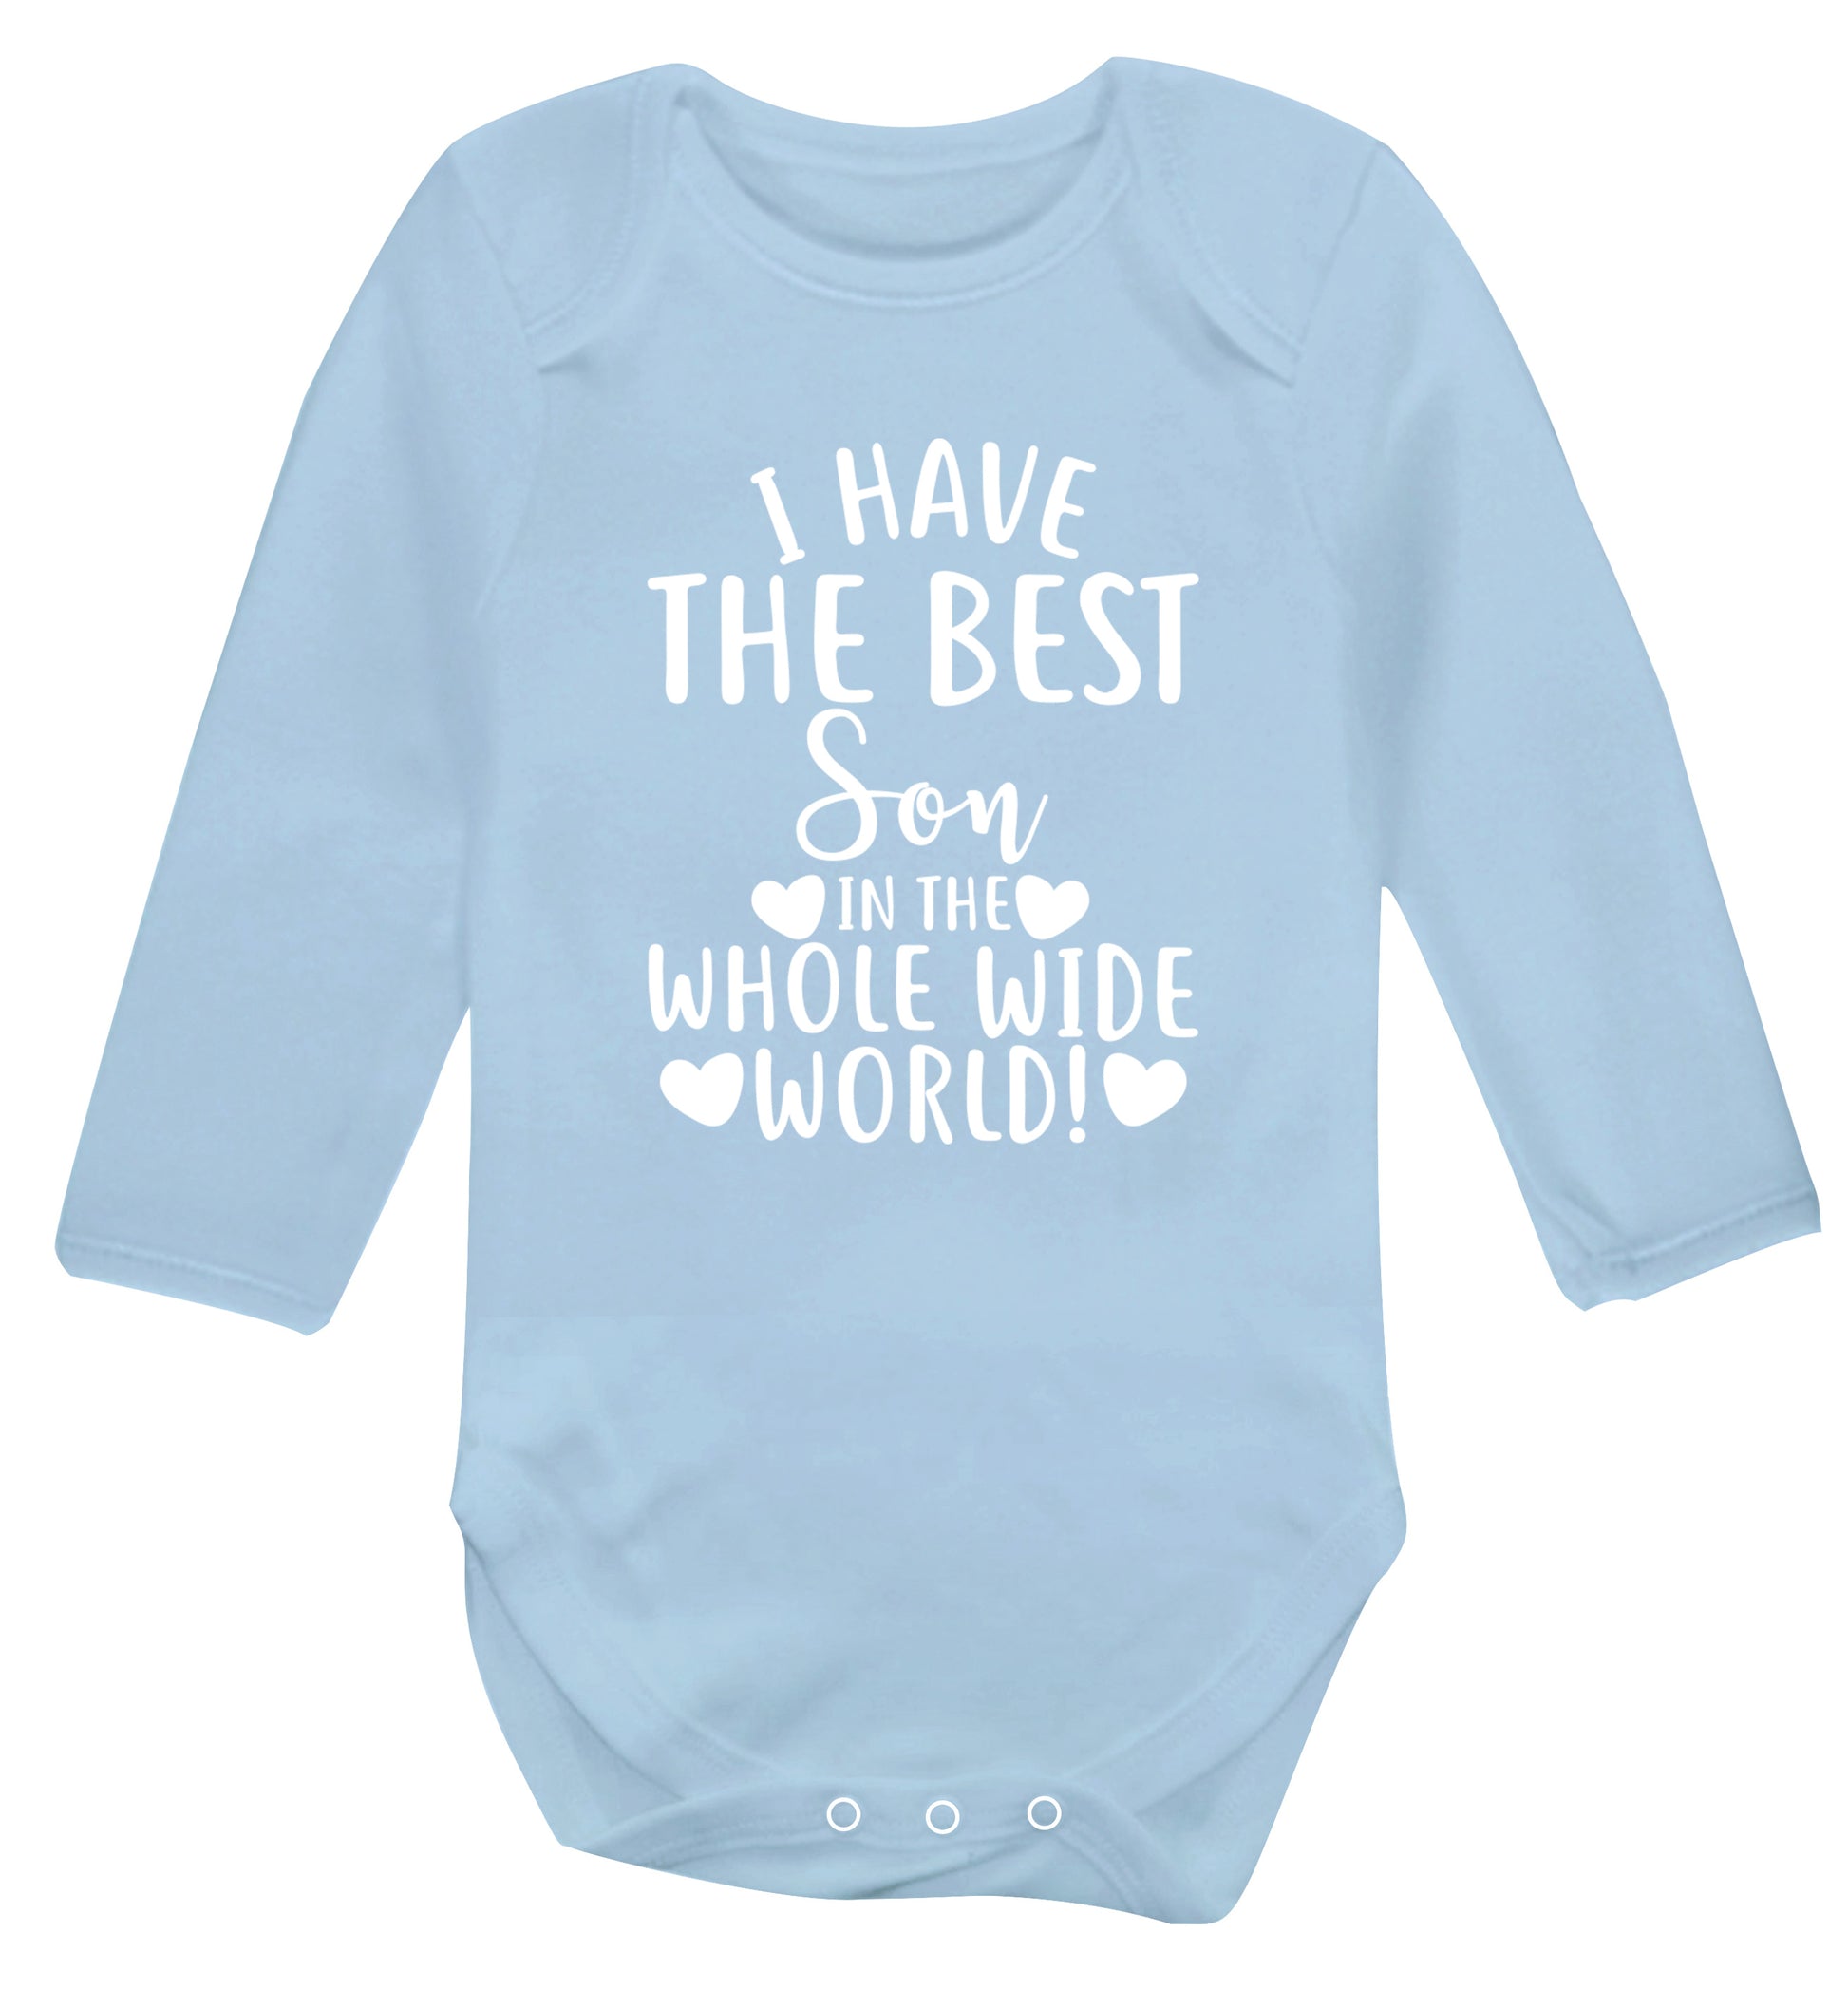 I have the best son in the whole wide world! Baby Vest long sleeved pale blue 6-12 months